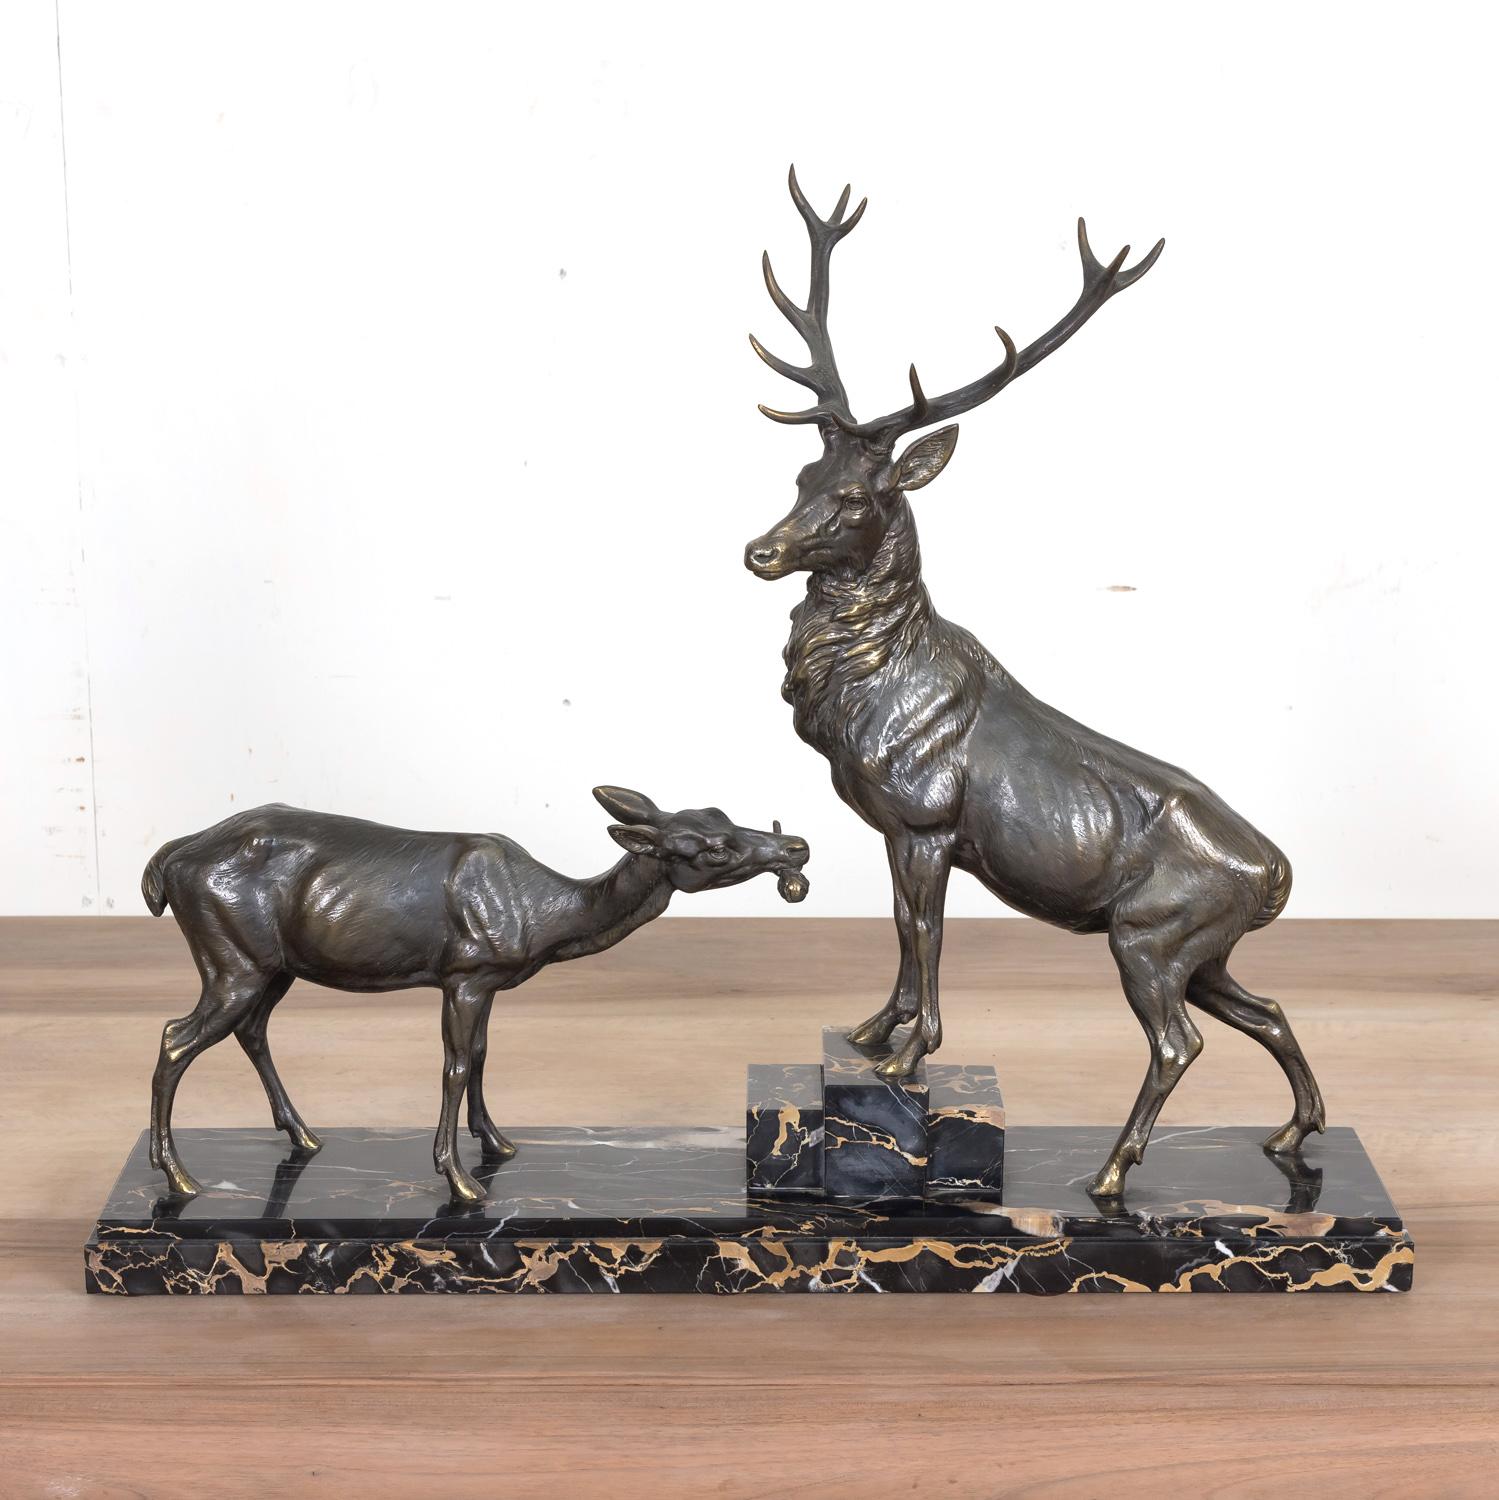 A fine Art Deco spelter animalier sculpture, naturalistically modeled and posed, of a twelve point stag and doe by French artist Louis Albert Carvin. The stag with his front legs raised on marble blocks and the whole mounted on a stunning